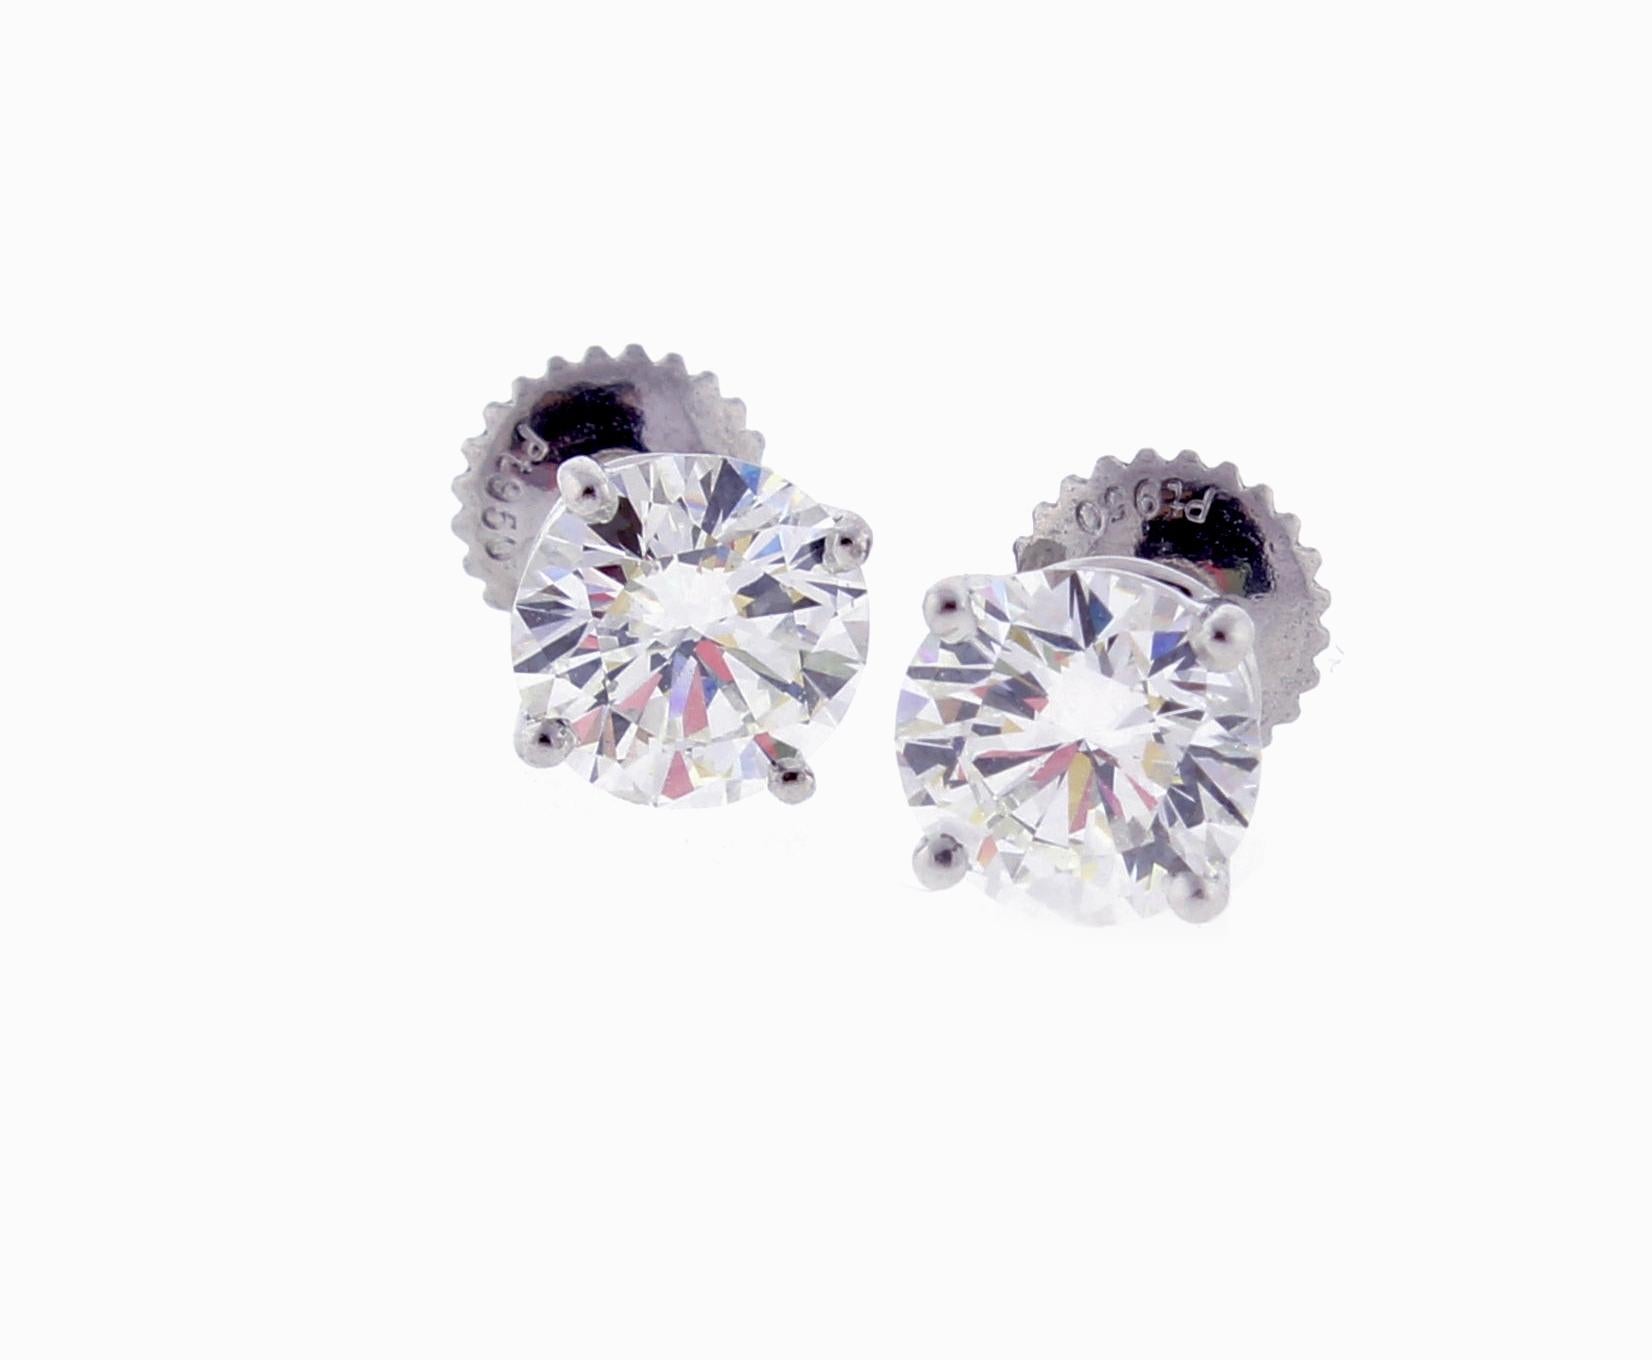 From Tiffany & Co., a pair of diamond screw back stud earrings
♦ Designer: / Hallmarks: Tiffany & Co
♦ Metal: Platinum 
♦ Gem stone: 2 Diamonds = 2.06 carats ,  H color VS1 clarity
♦ Packaging: Tiffany box 
♦ Condition:very good , pre-owned
♦ The